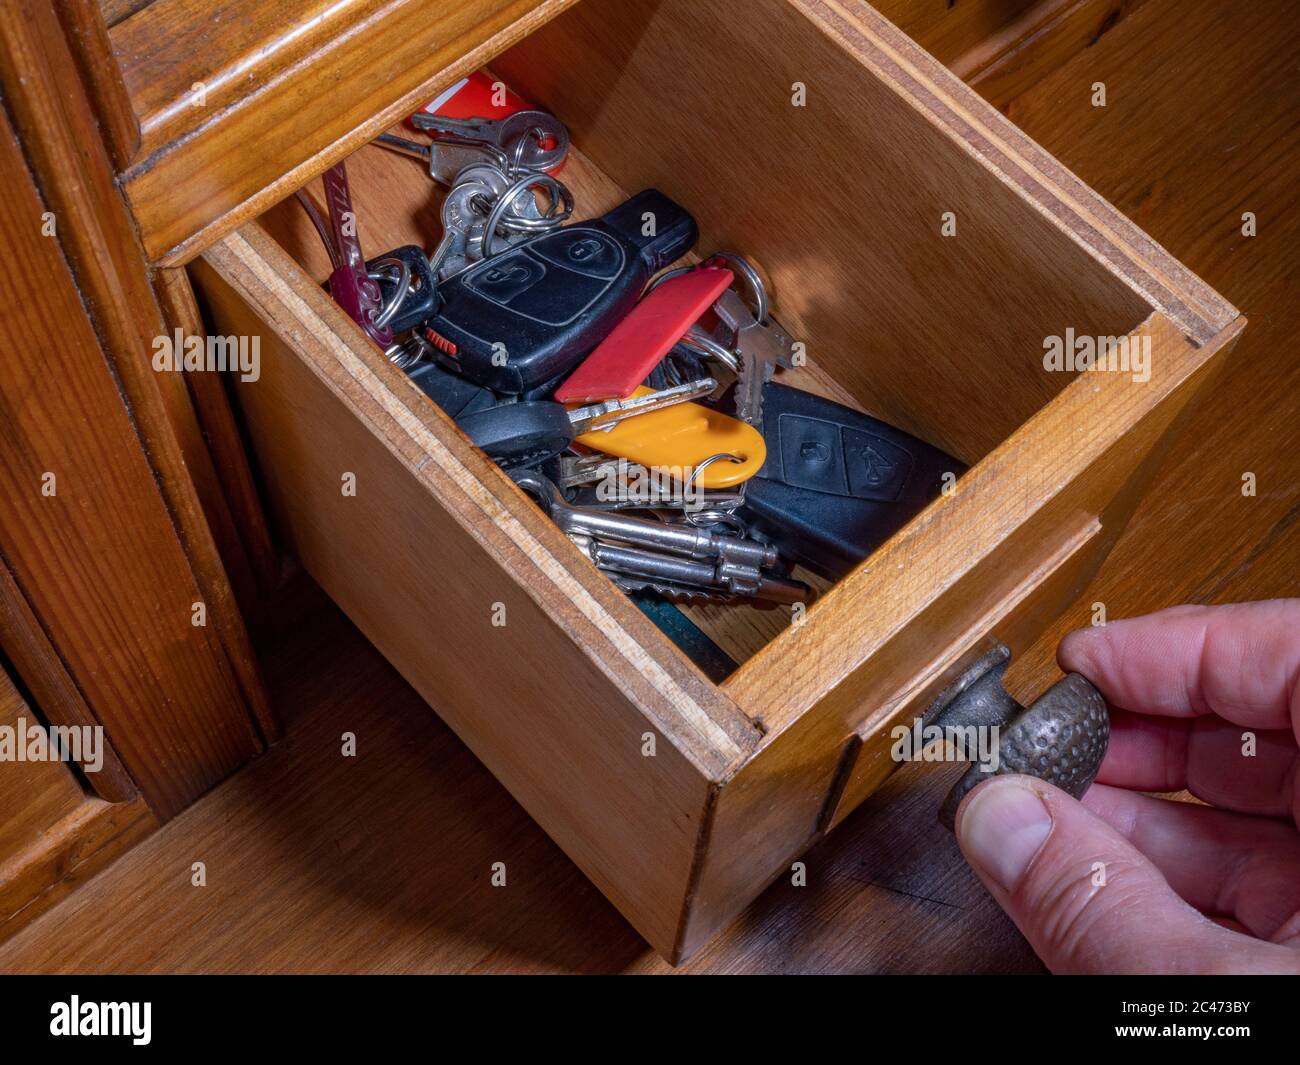 Close overhead shot of man’s fingers on the knob of a small open drawer in an old pine unit, holding an assortment of vehicle  door and ignition keys. Stock Photo